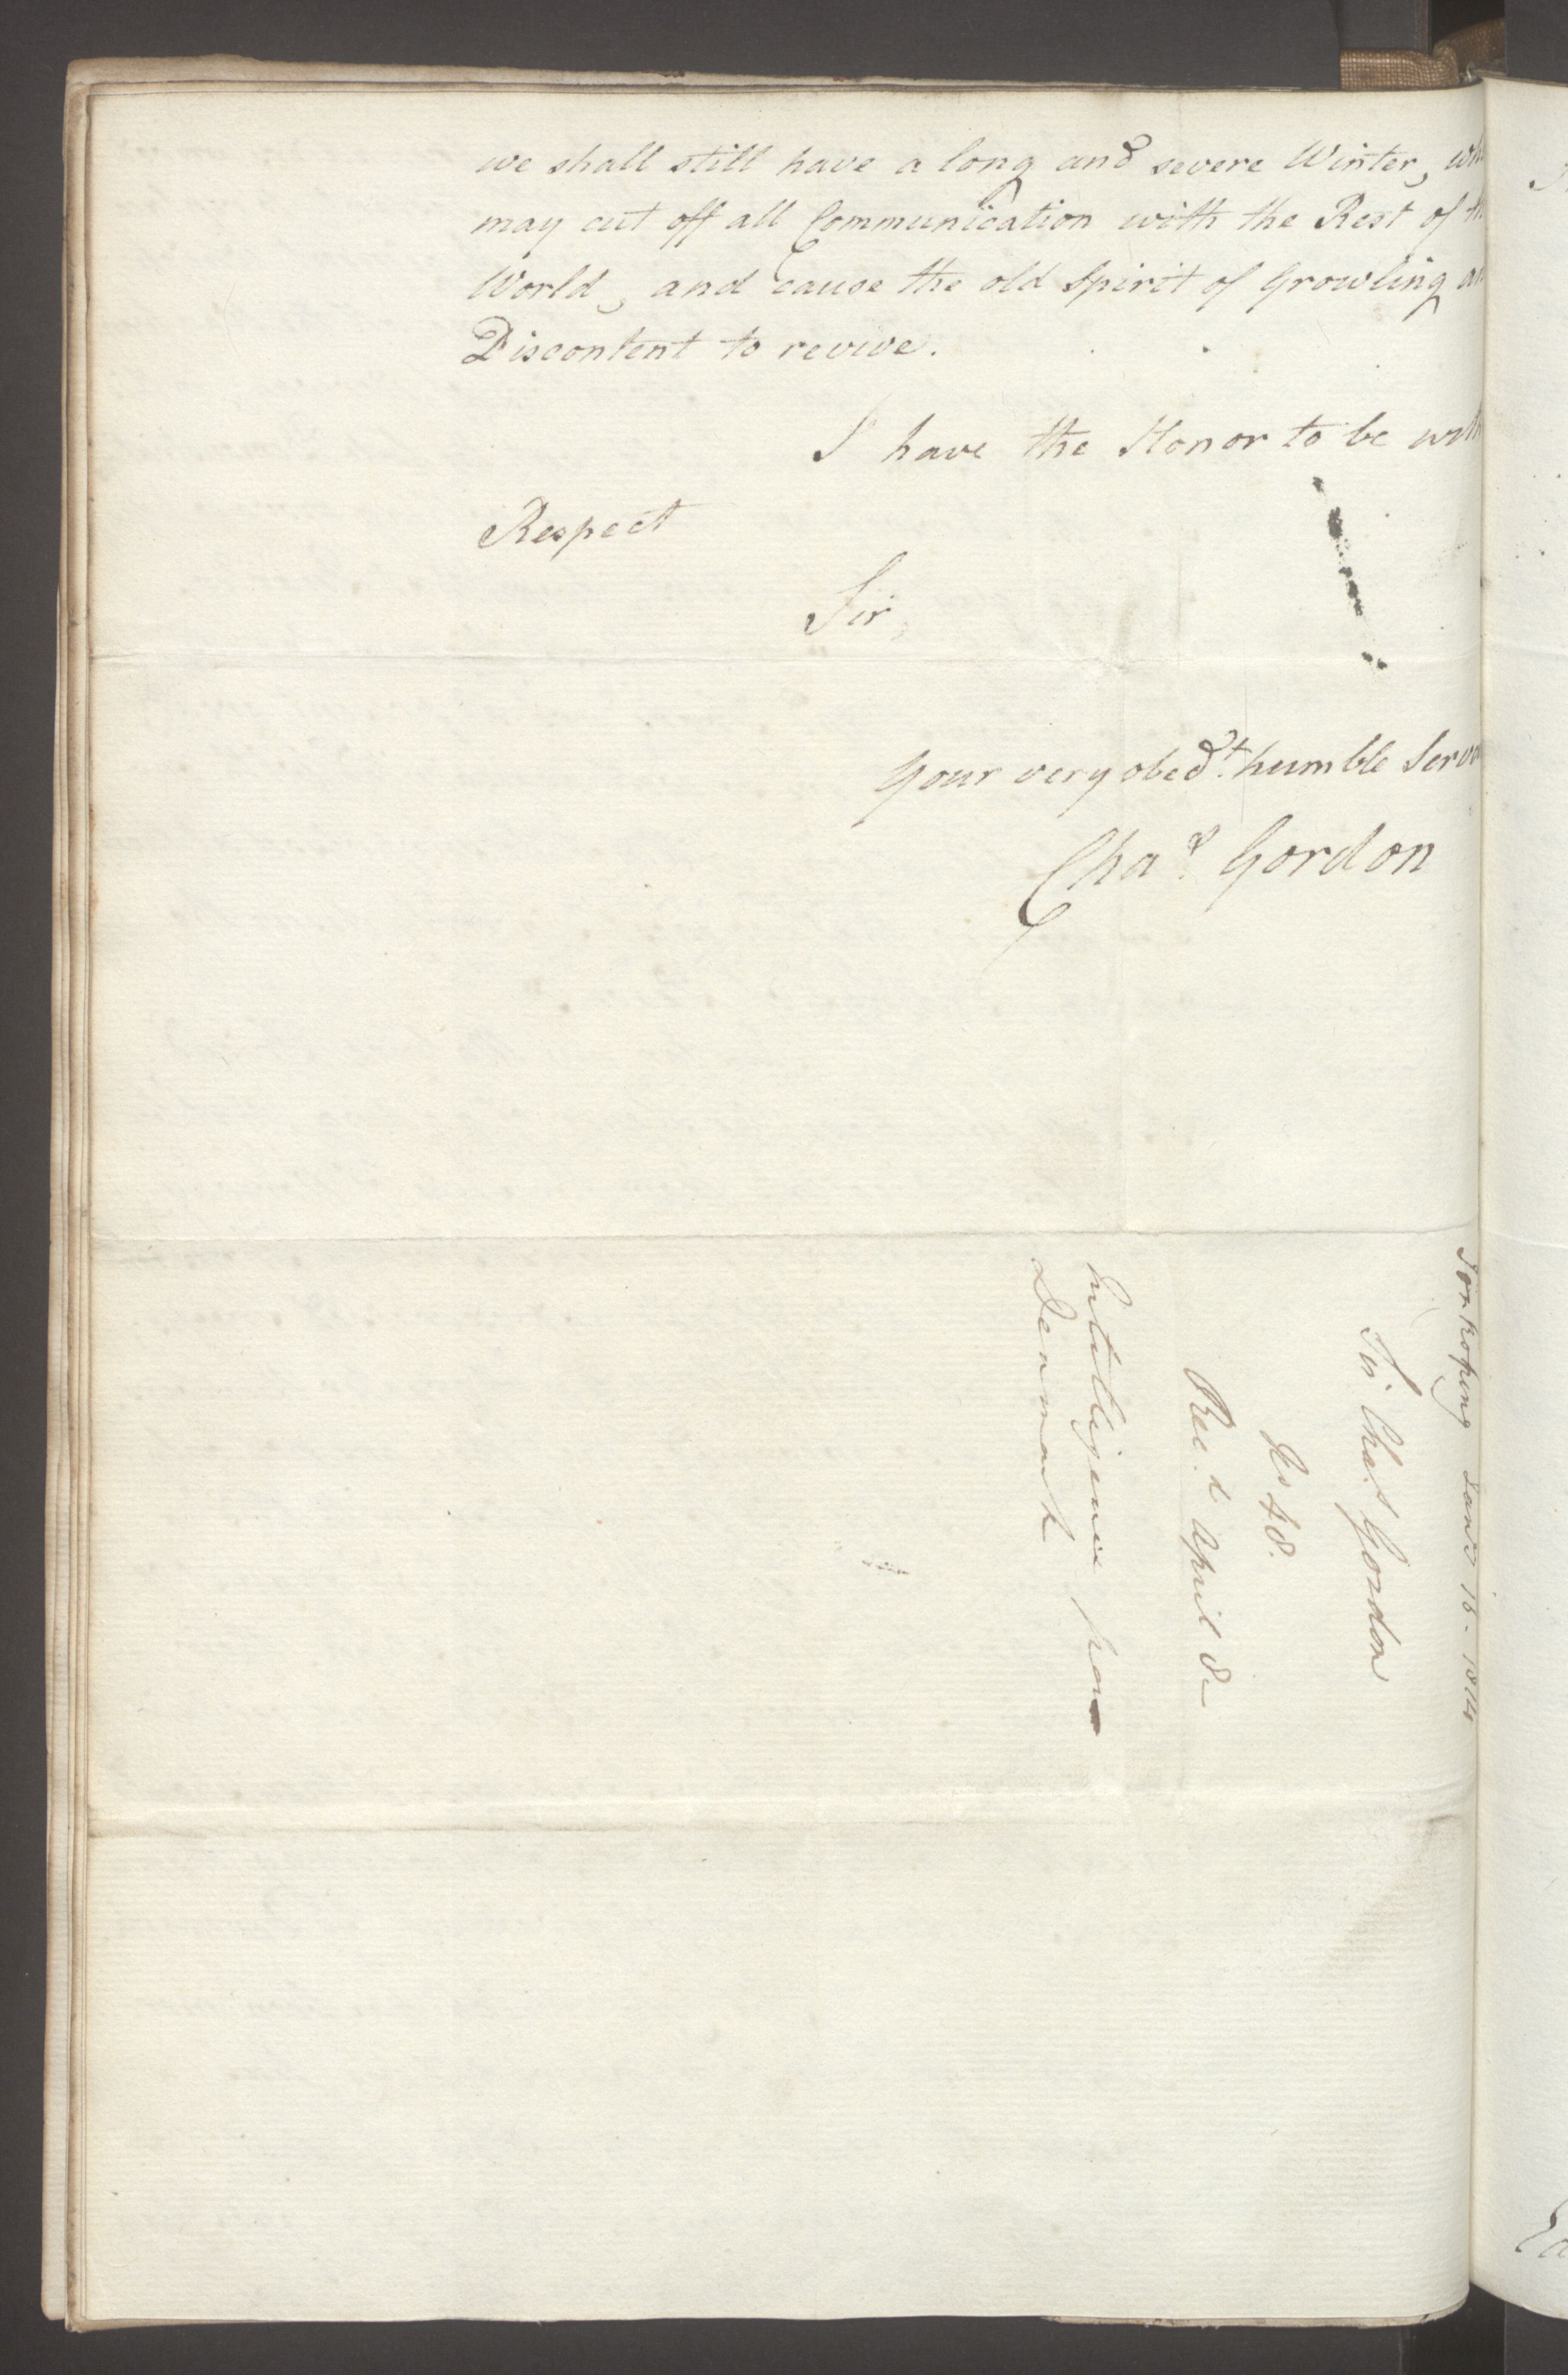 Foreign Office*, UKA/-/FO 38/16: Sir C. Gordon. Reports from Malmö, Jonkoping, and Helsingborg, 1814, p. 10